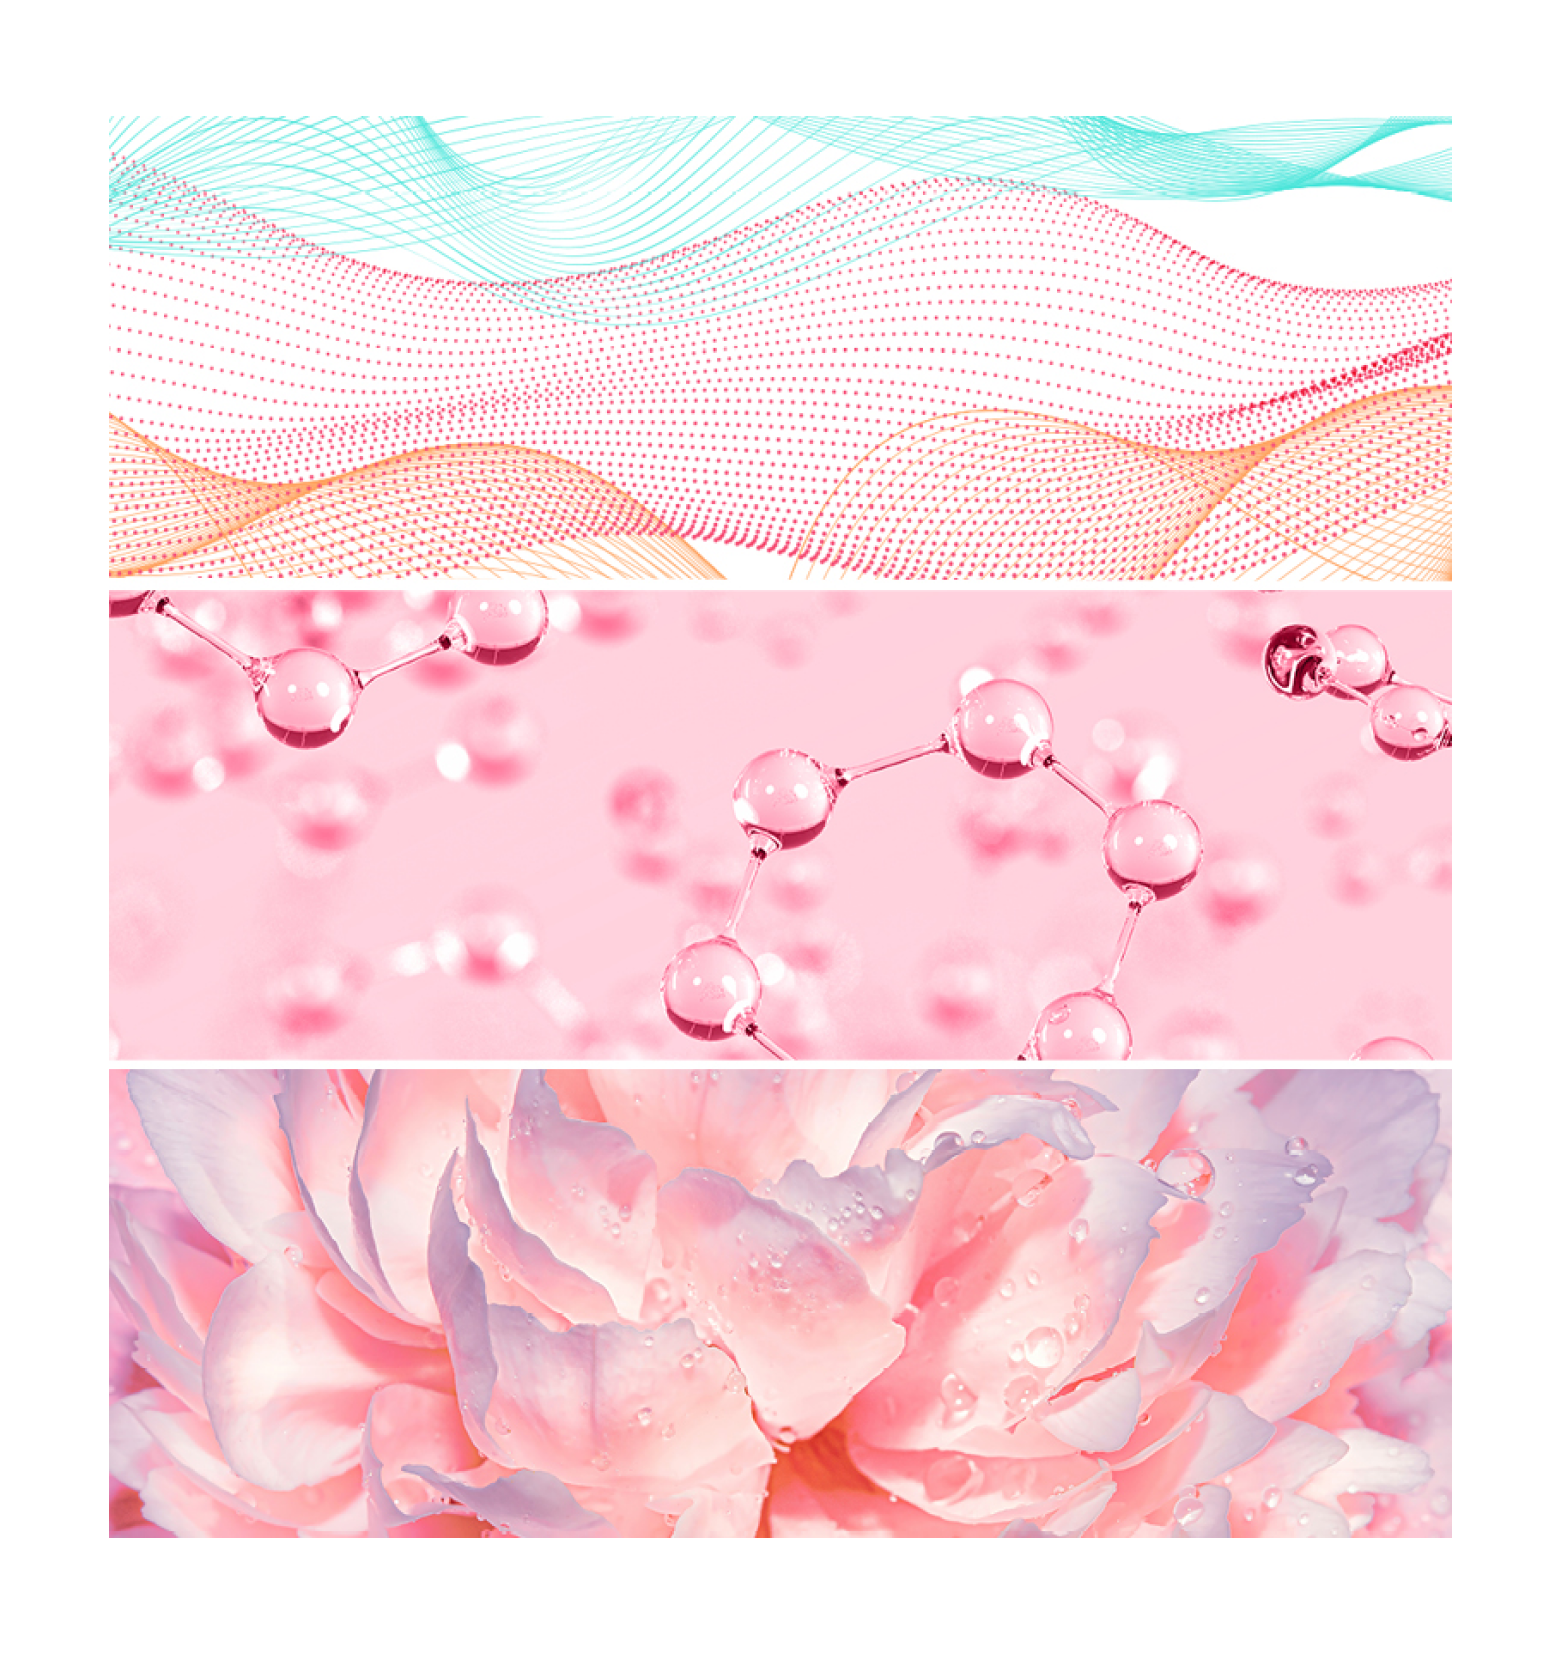 Three-layered abstract graphic: top shows wavy blue and pink mesh pattern, middle features floating bubble-like beads on a pink background, and bottom depicts close-up of dewy pink roses with OHUI Chiffon Ceramide Complex.